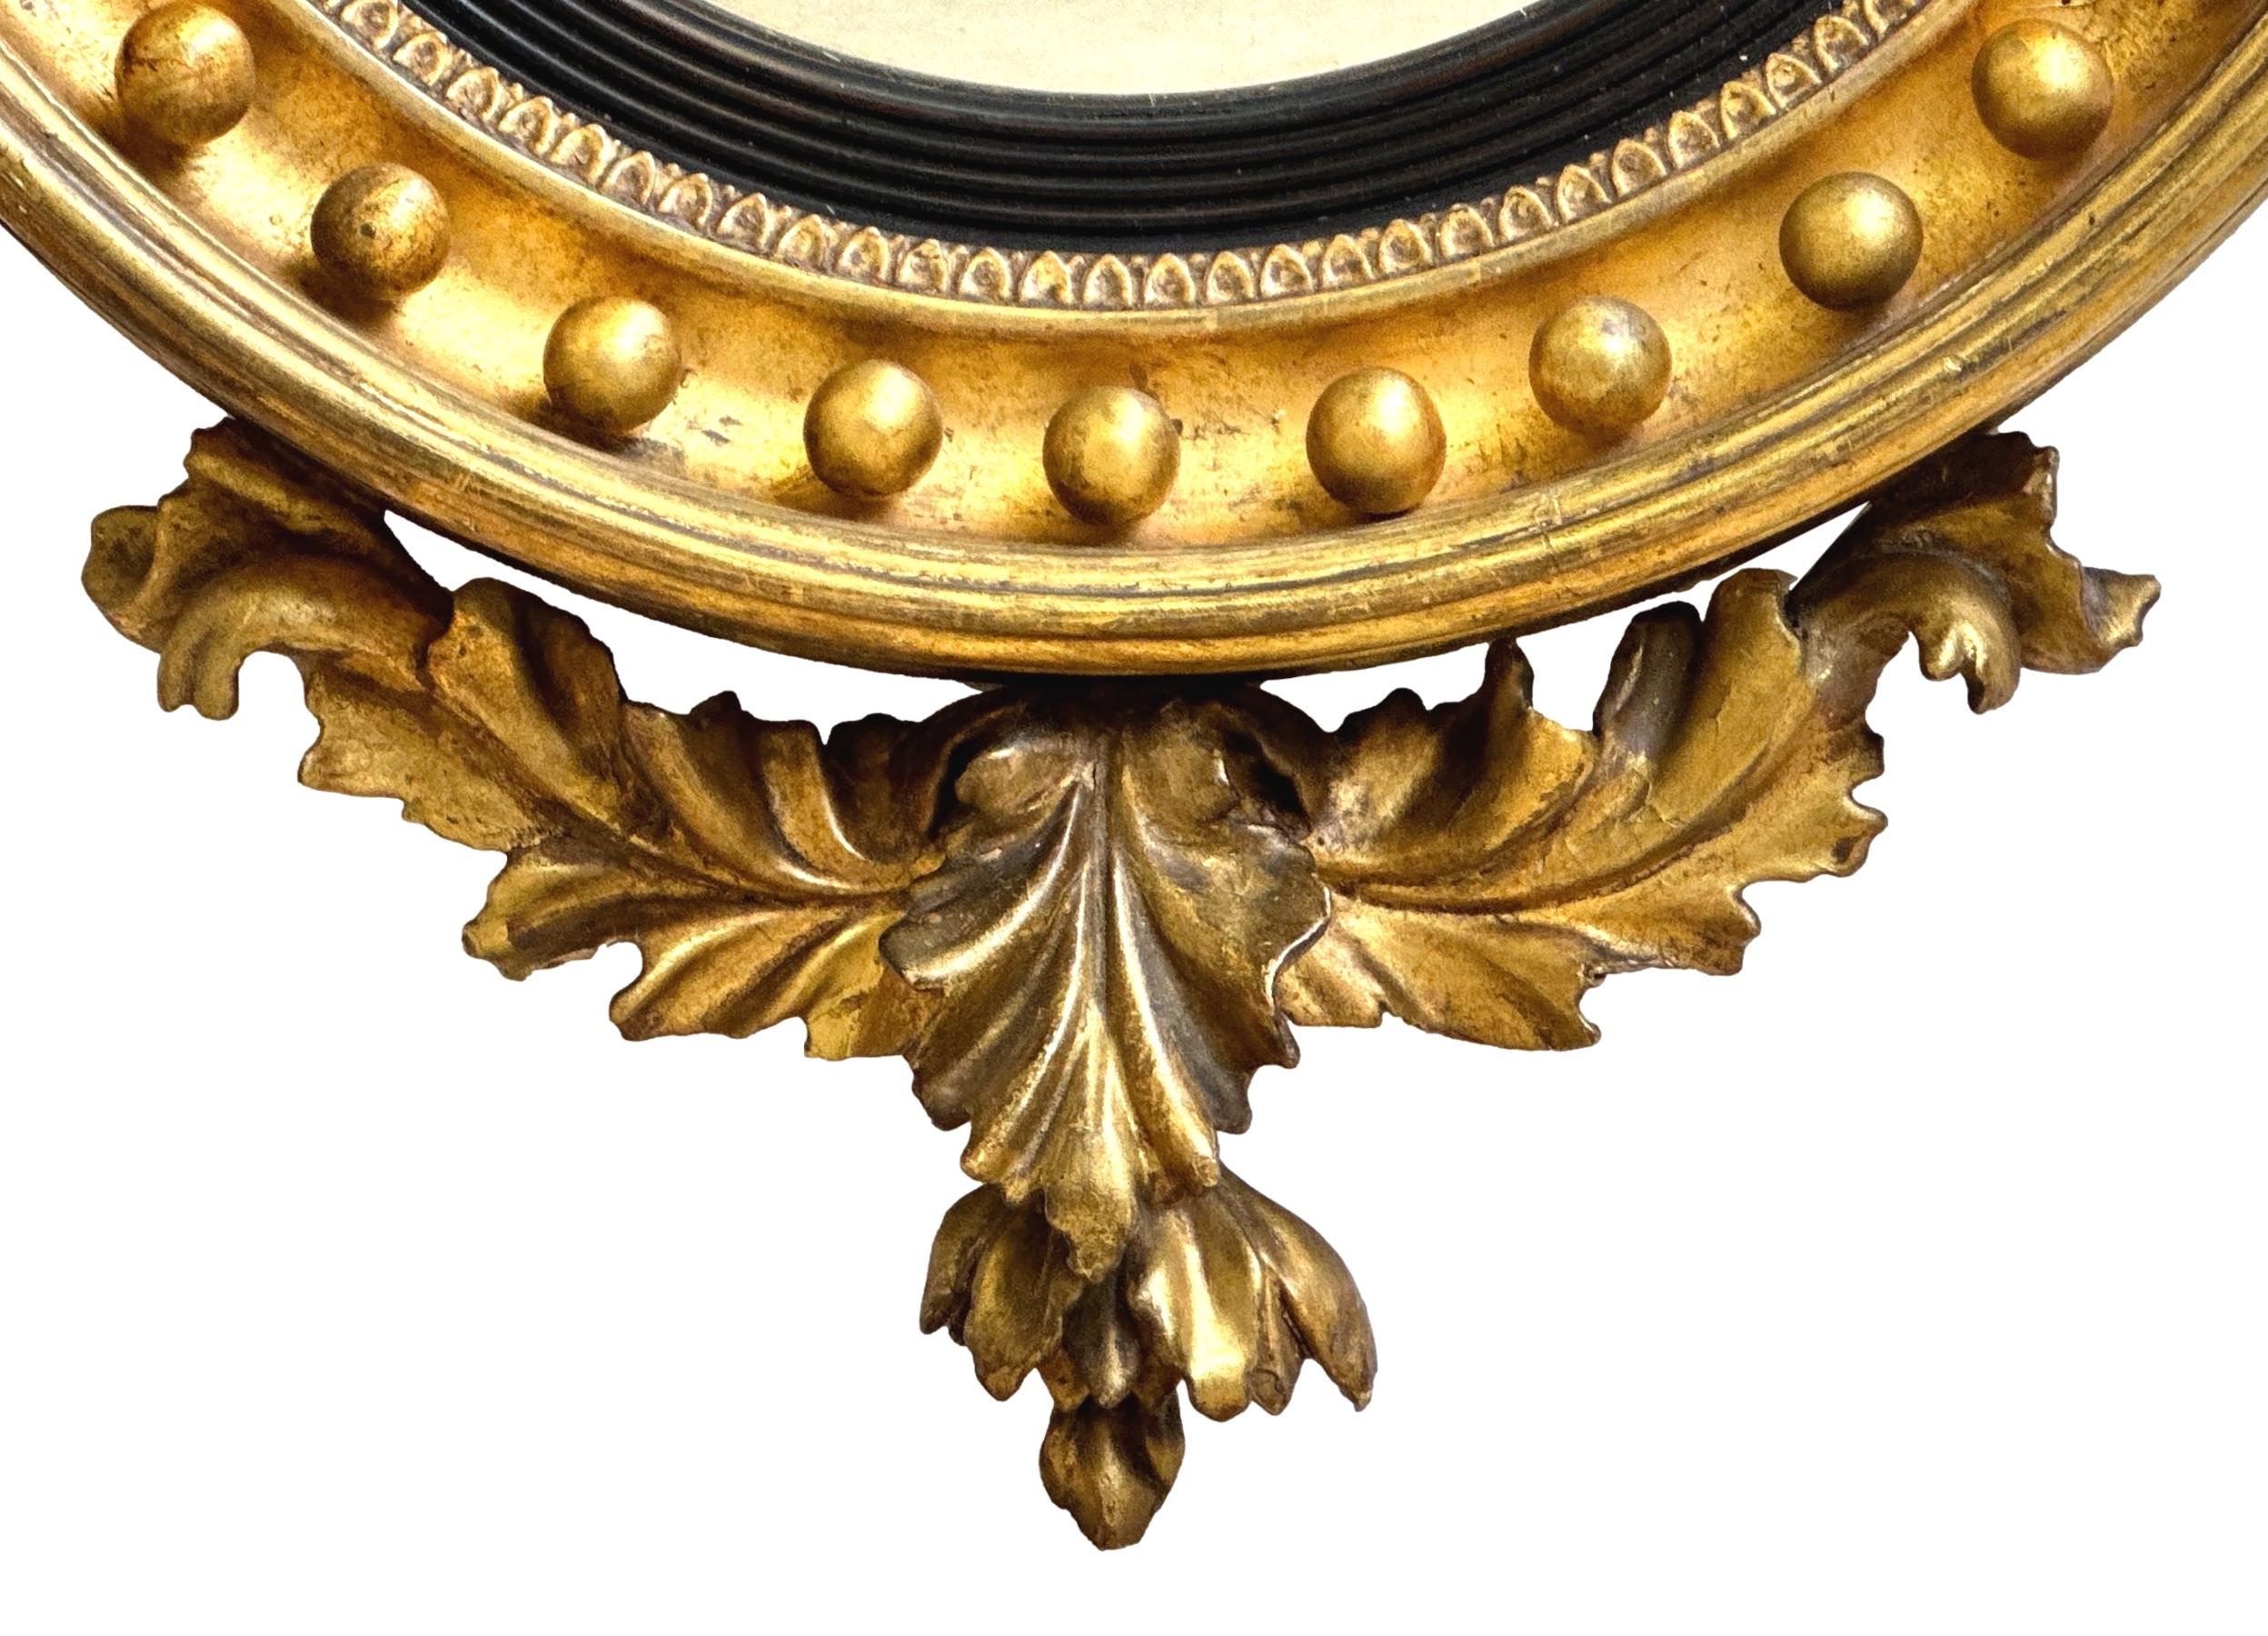 A fine Regency Period Giltwood Circular Convex Mirror, Surmounted With Attractive Stylised Dolphin Set Upon Rocks And Foliage To Top, Above Moulded Giltwood Concave Frame With Gilt Ball Border, Flanked By Elegant Original Candle Arms To Each Side